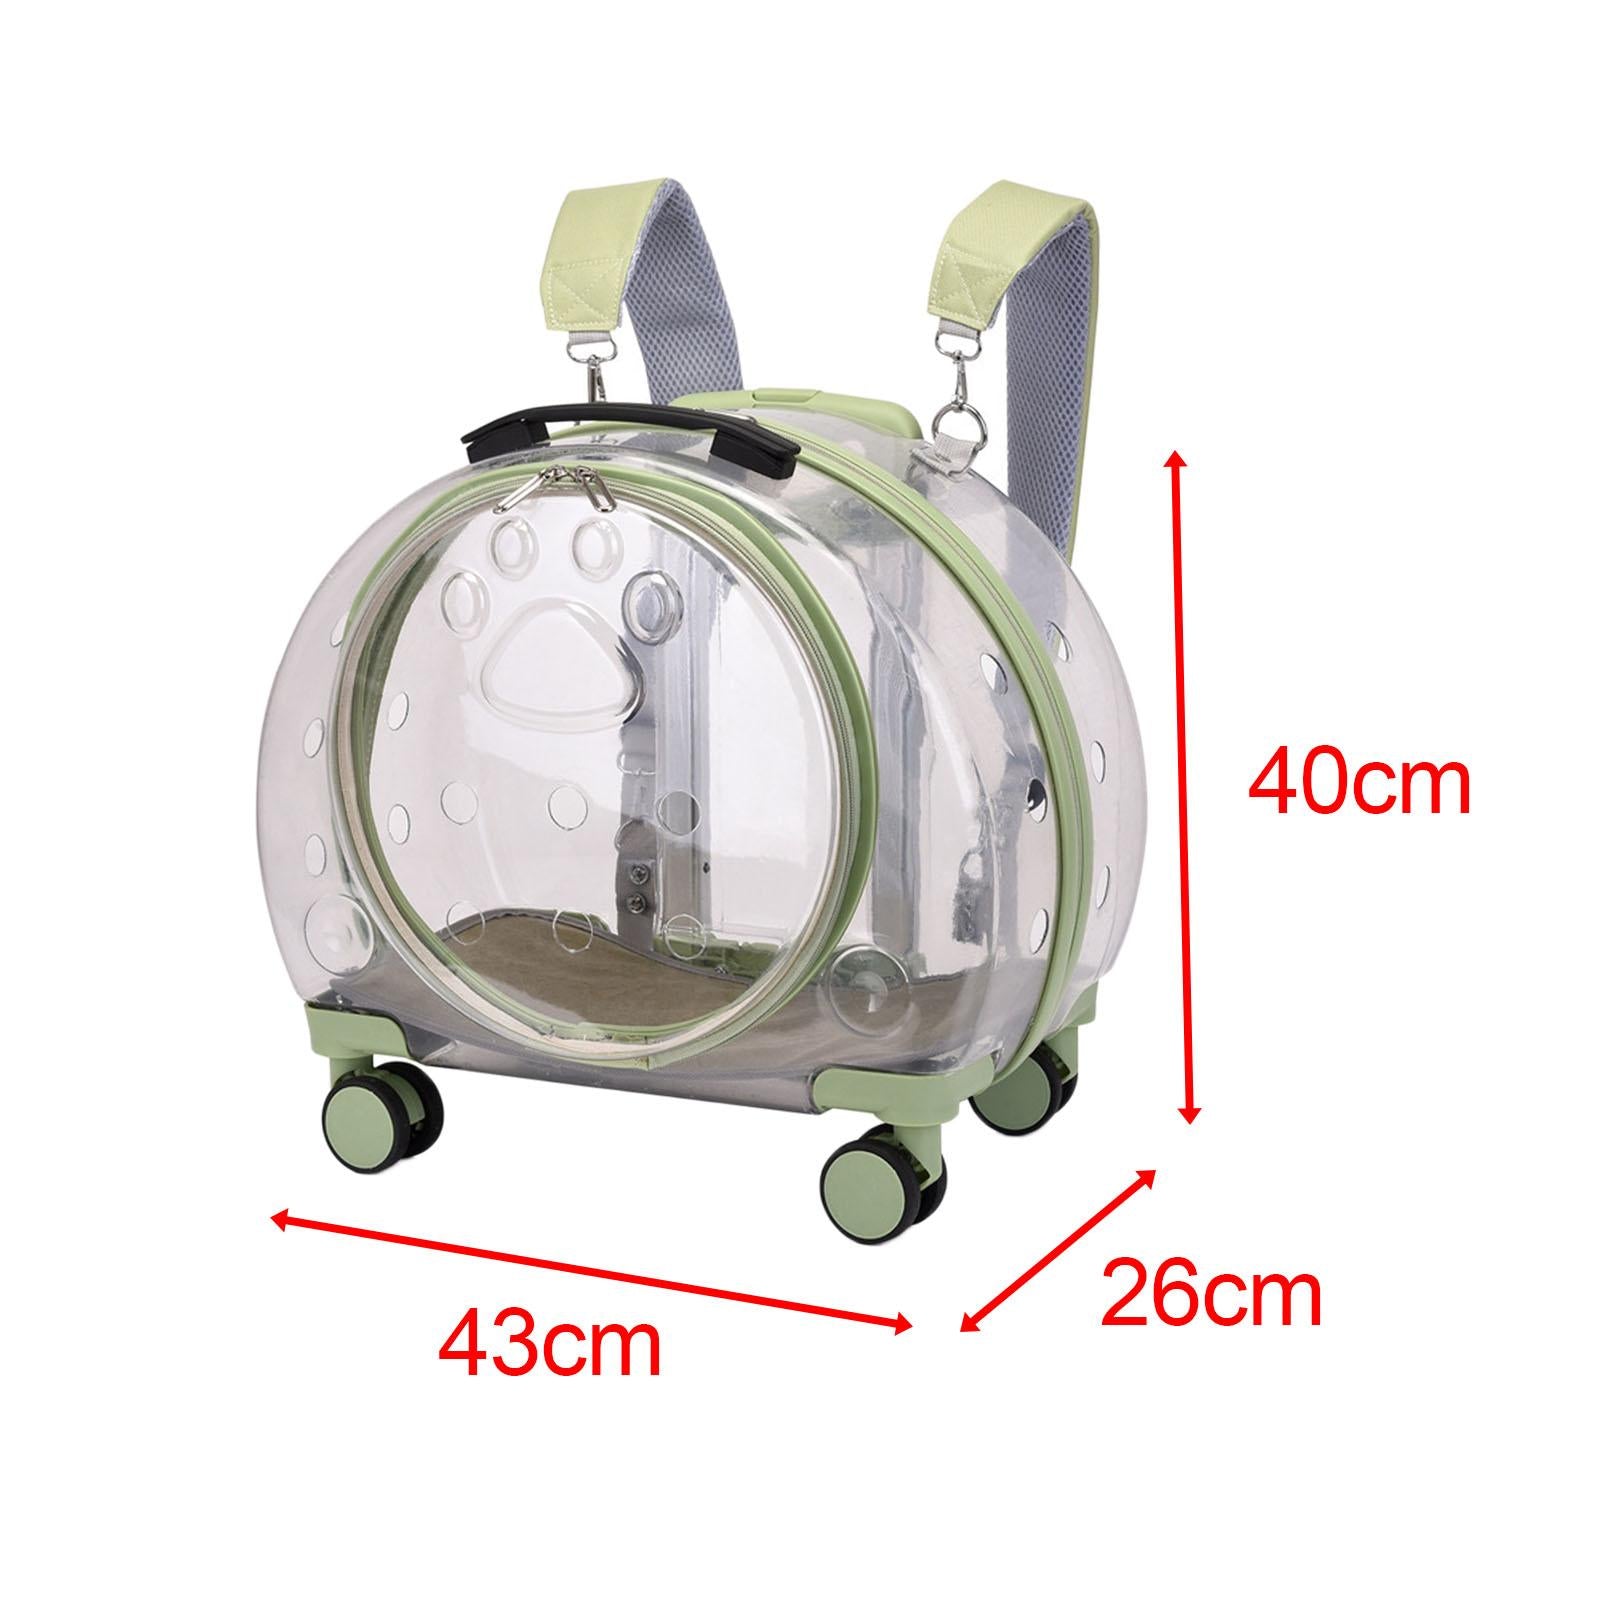 Kitten Bag, Backpack Telescopic Pull Rod Lightweight with Wheels Luggage Handbag Pet Trolley Case for Small Dogs Outgoing Cats Fishing Kitten Fully Clear and Green